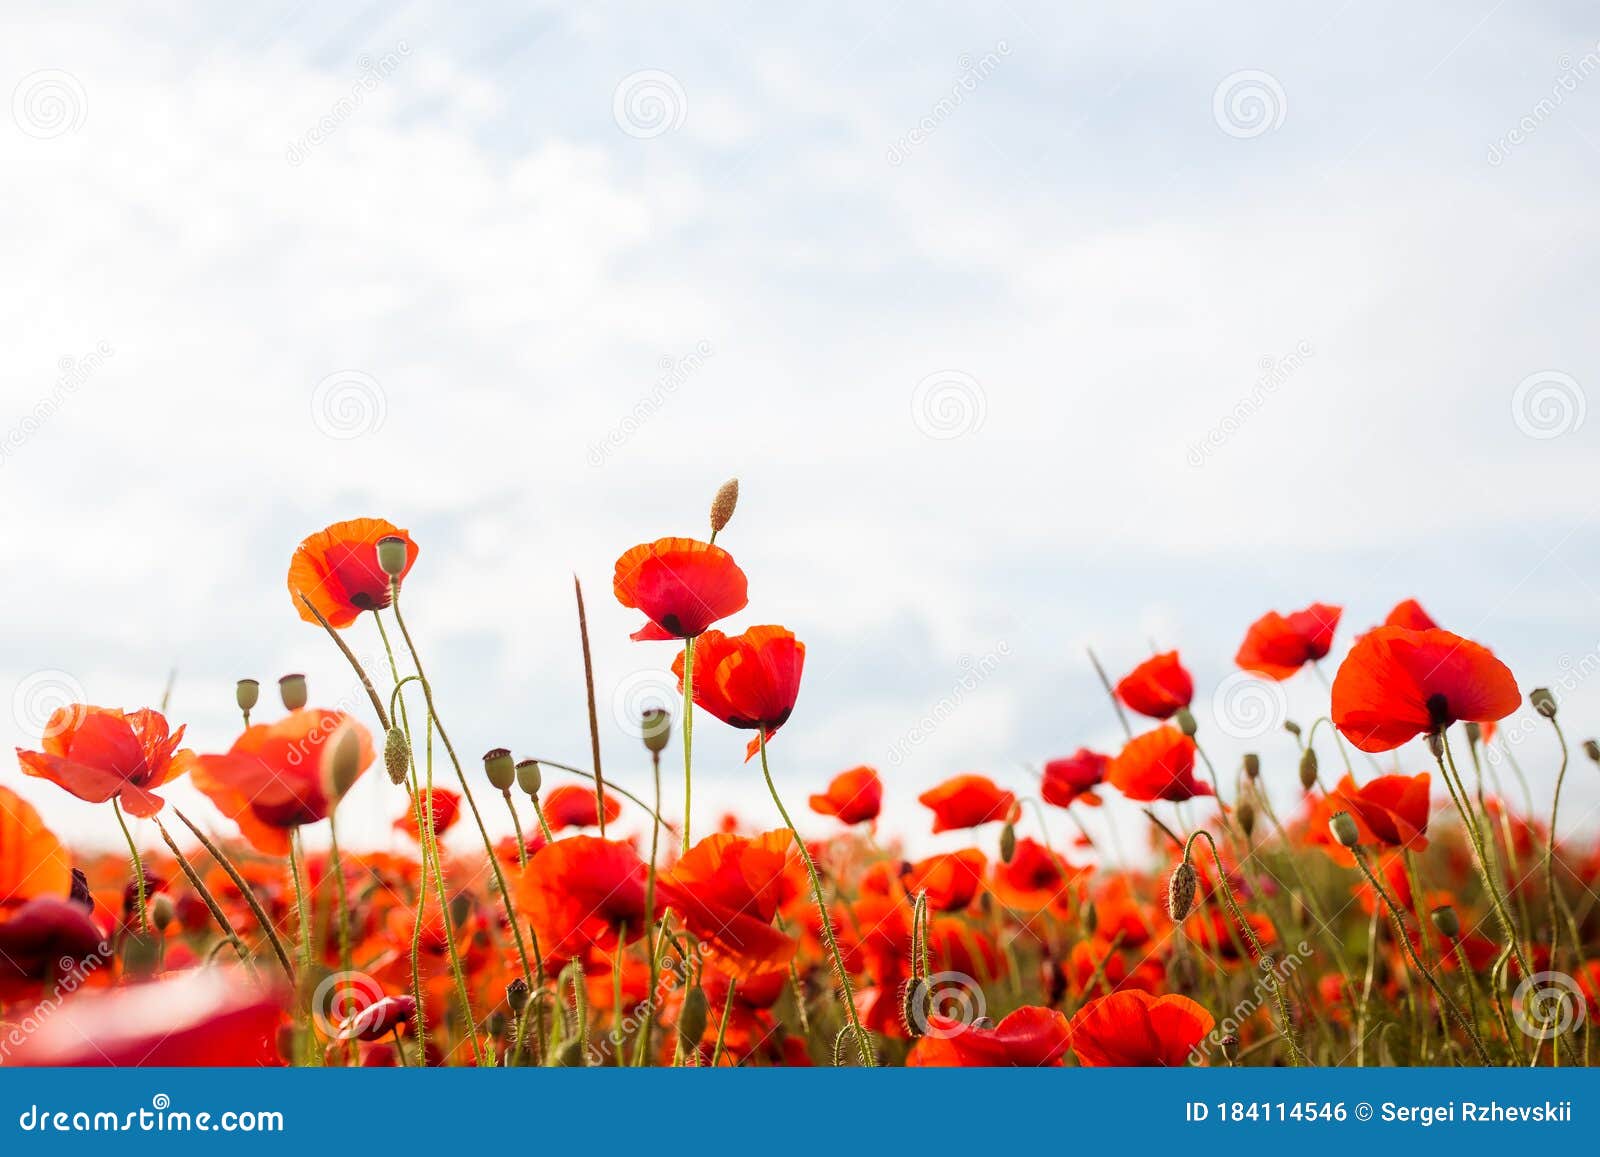 poppy field and red poppies background